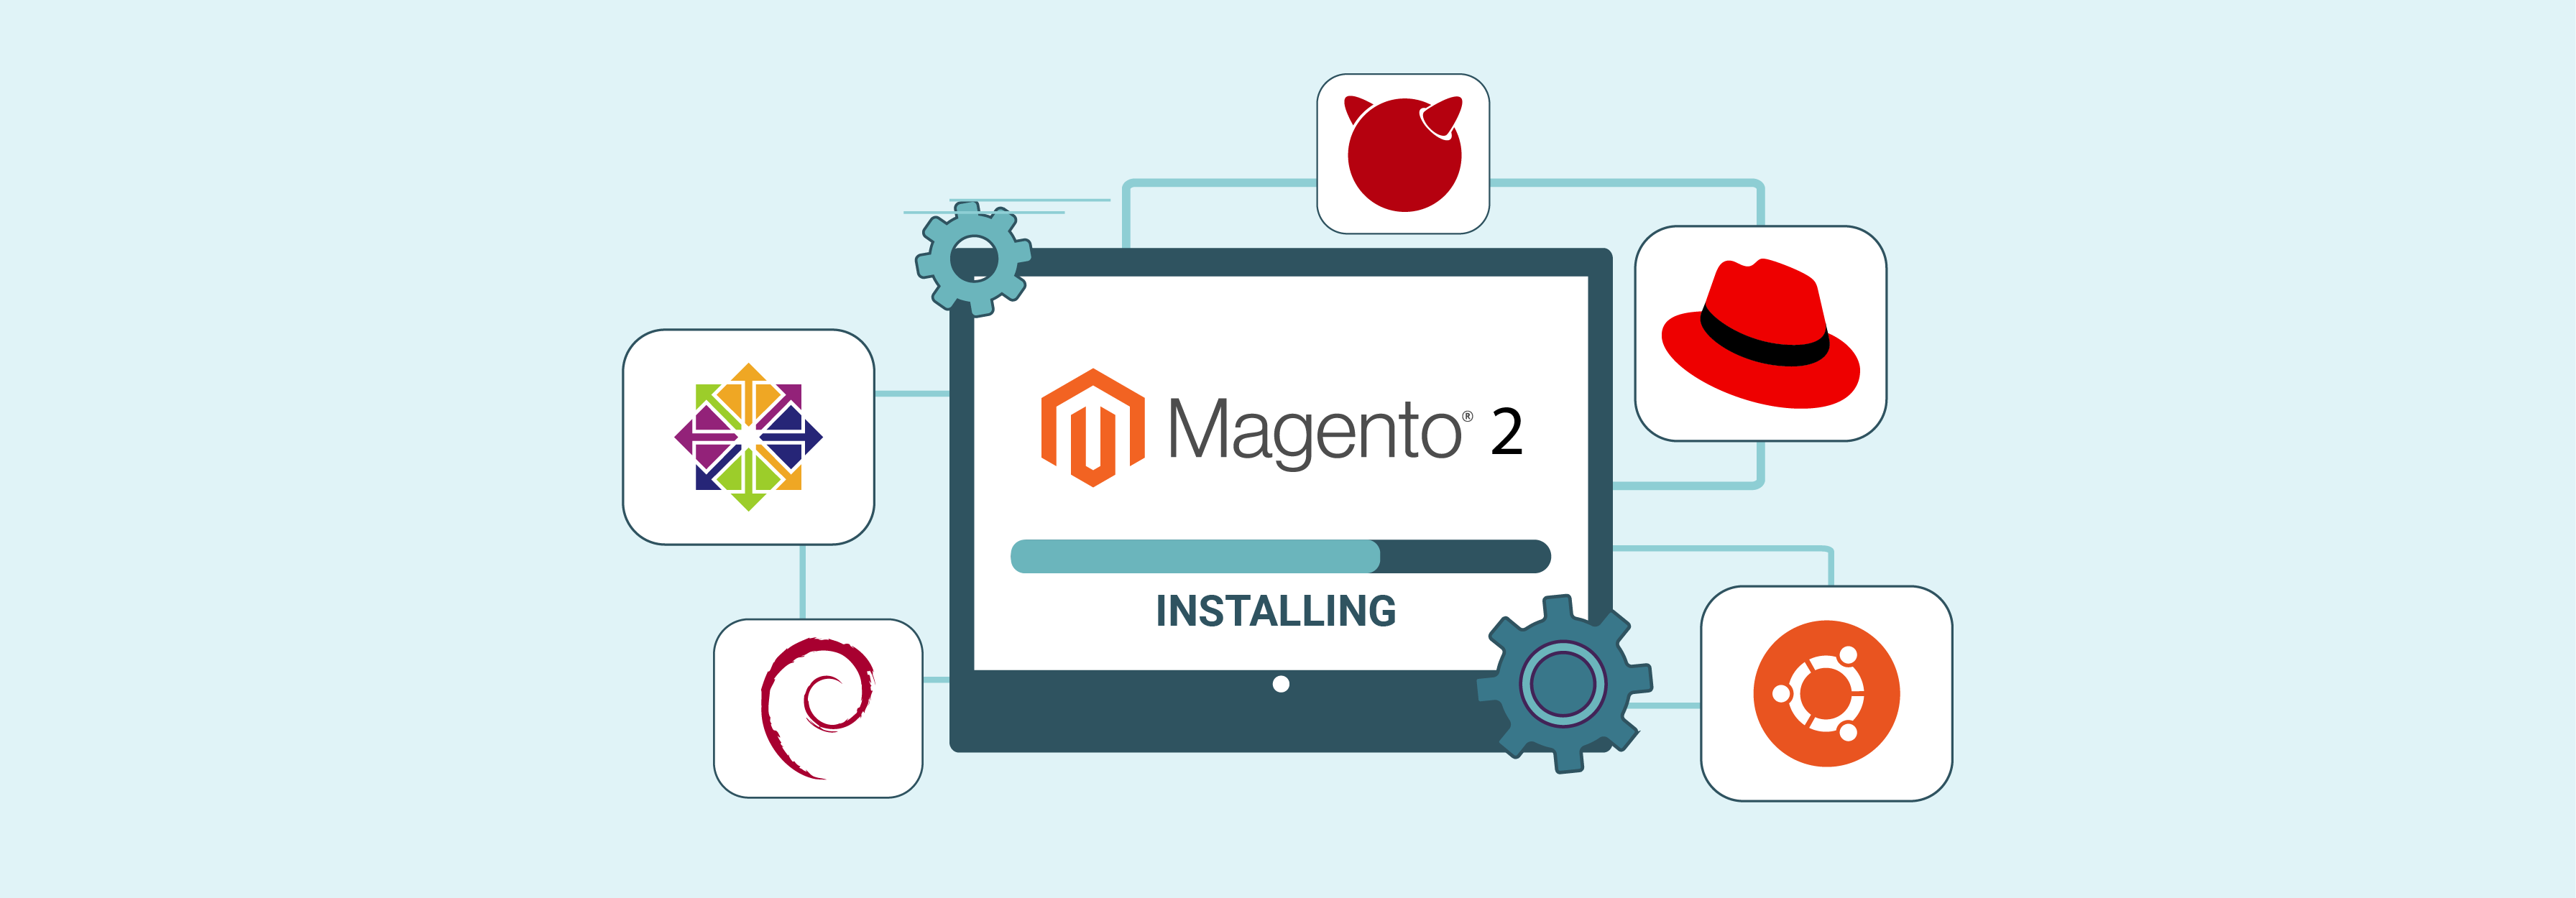 List of supported operating systems for Magento 2 stores